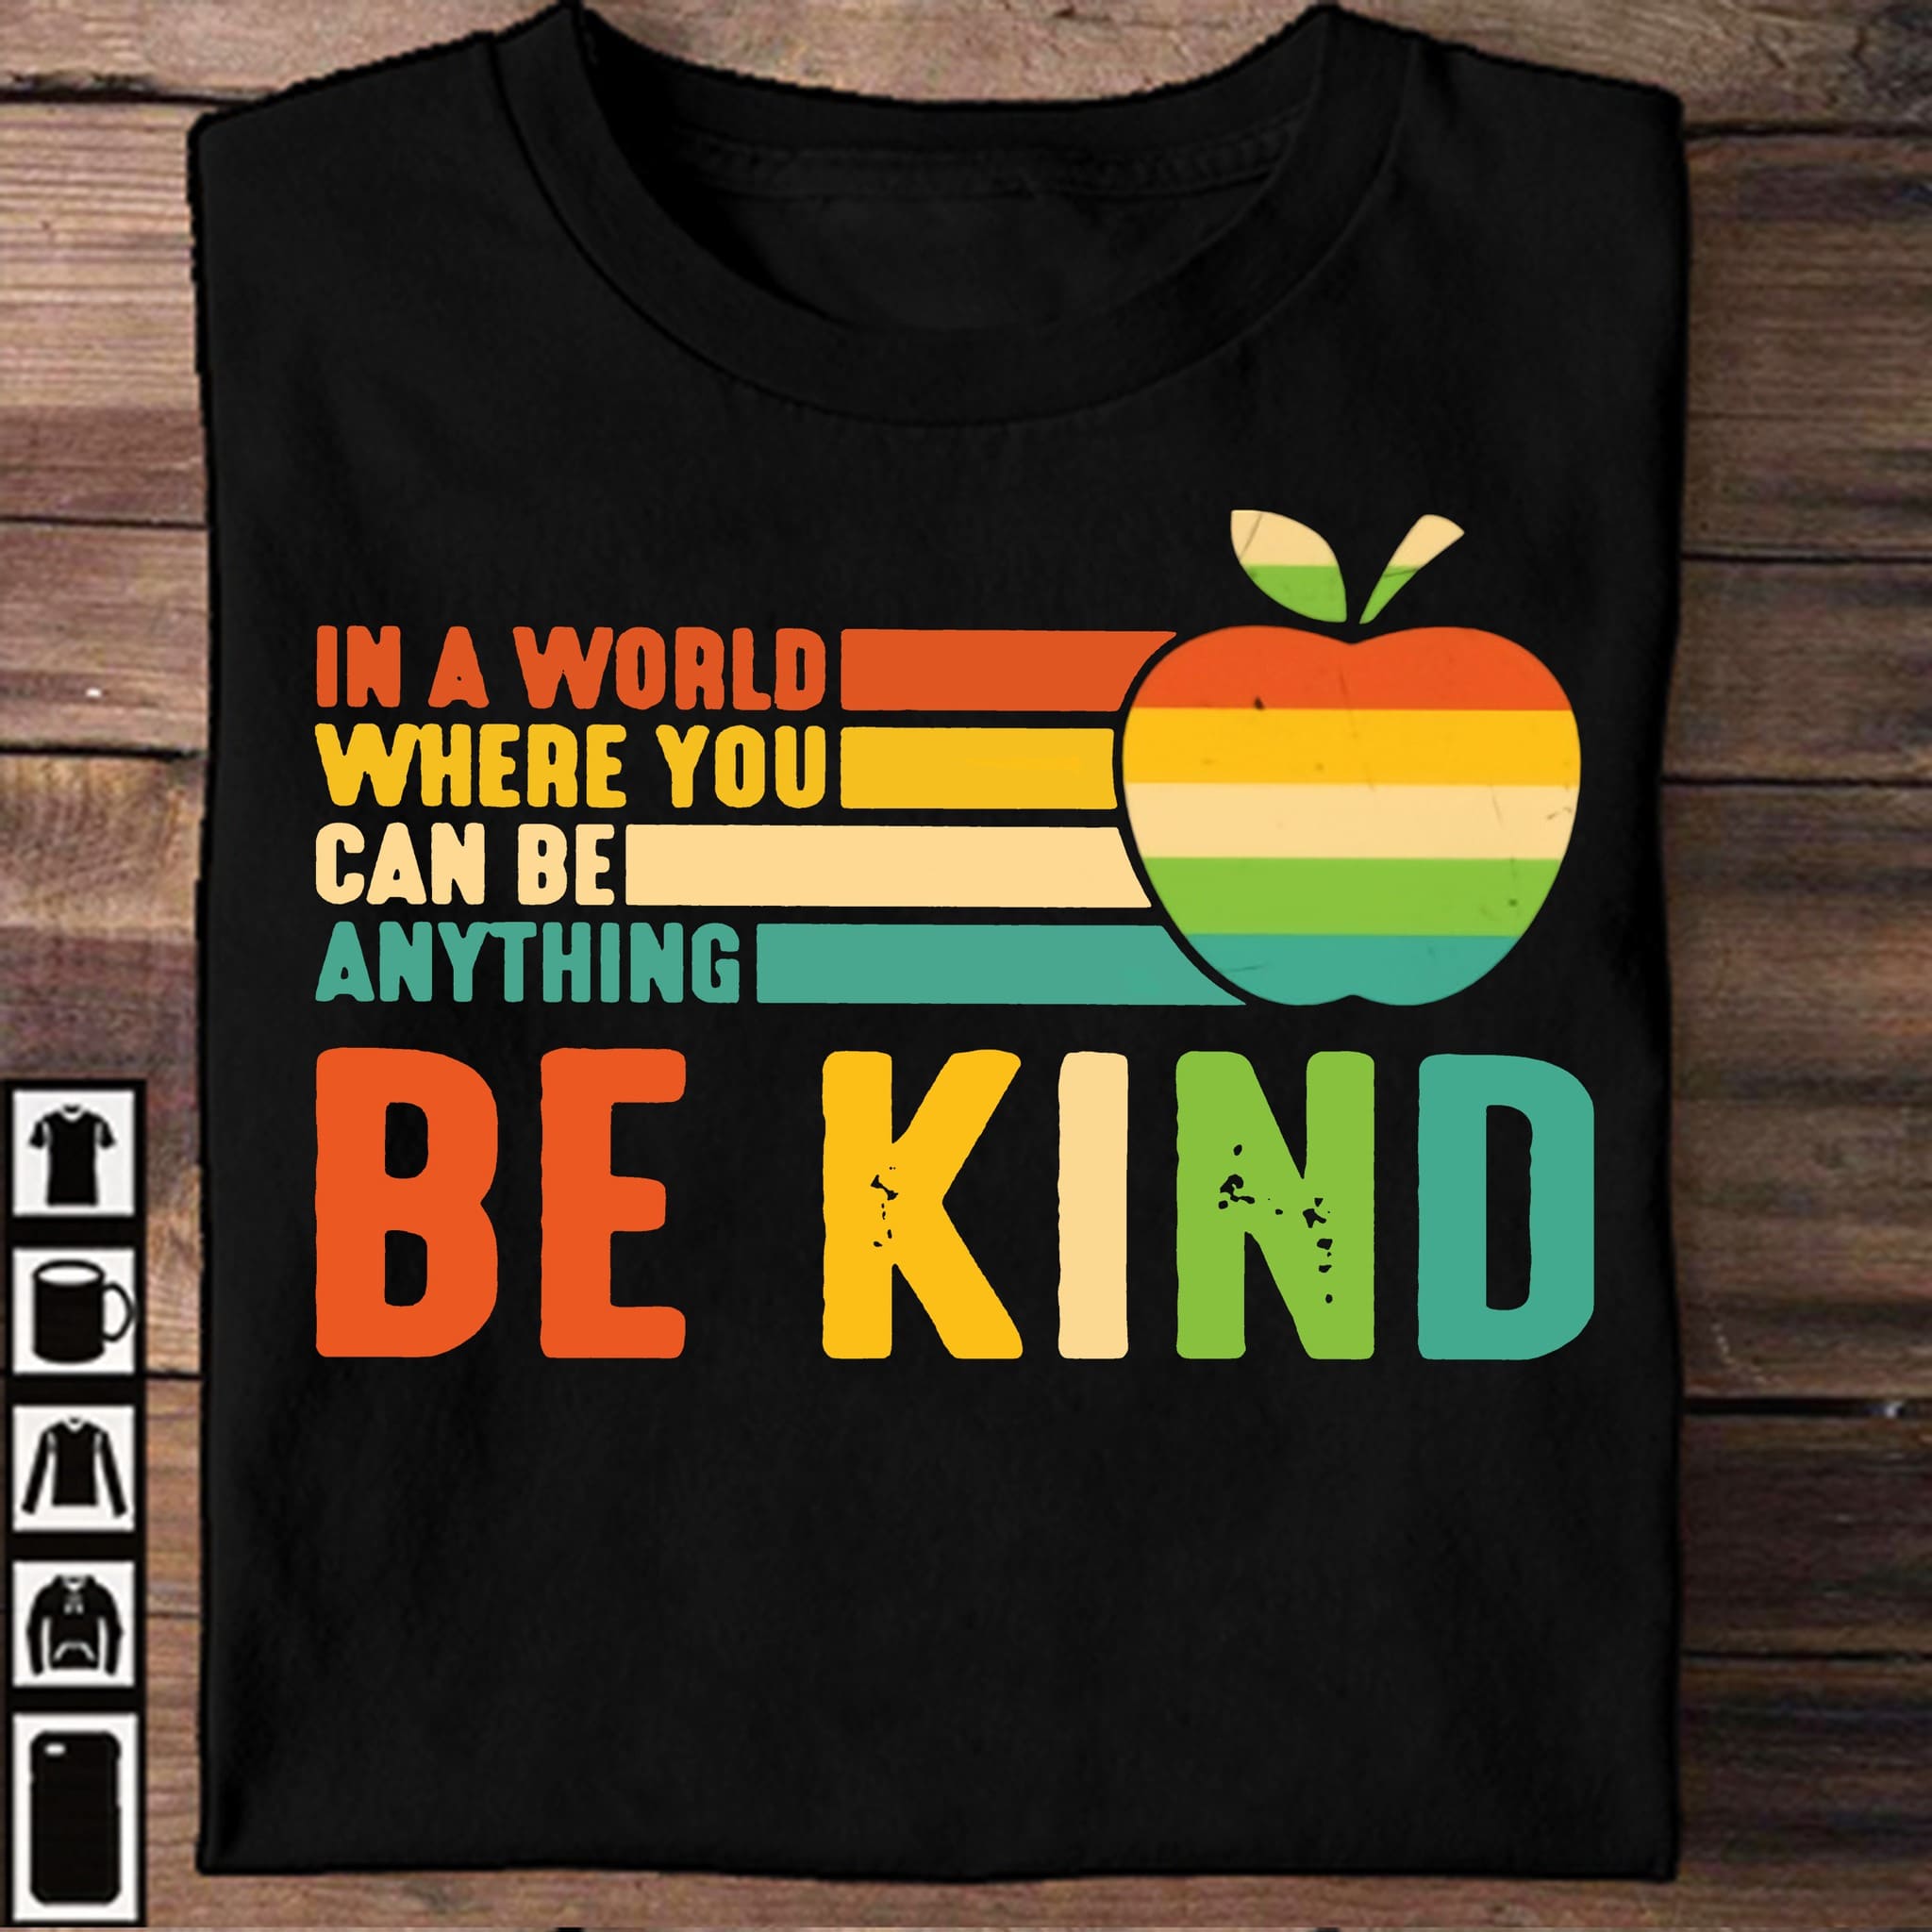 In a world where you can be anything, be kind - Be kind in life, living life in peace